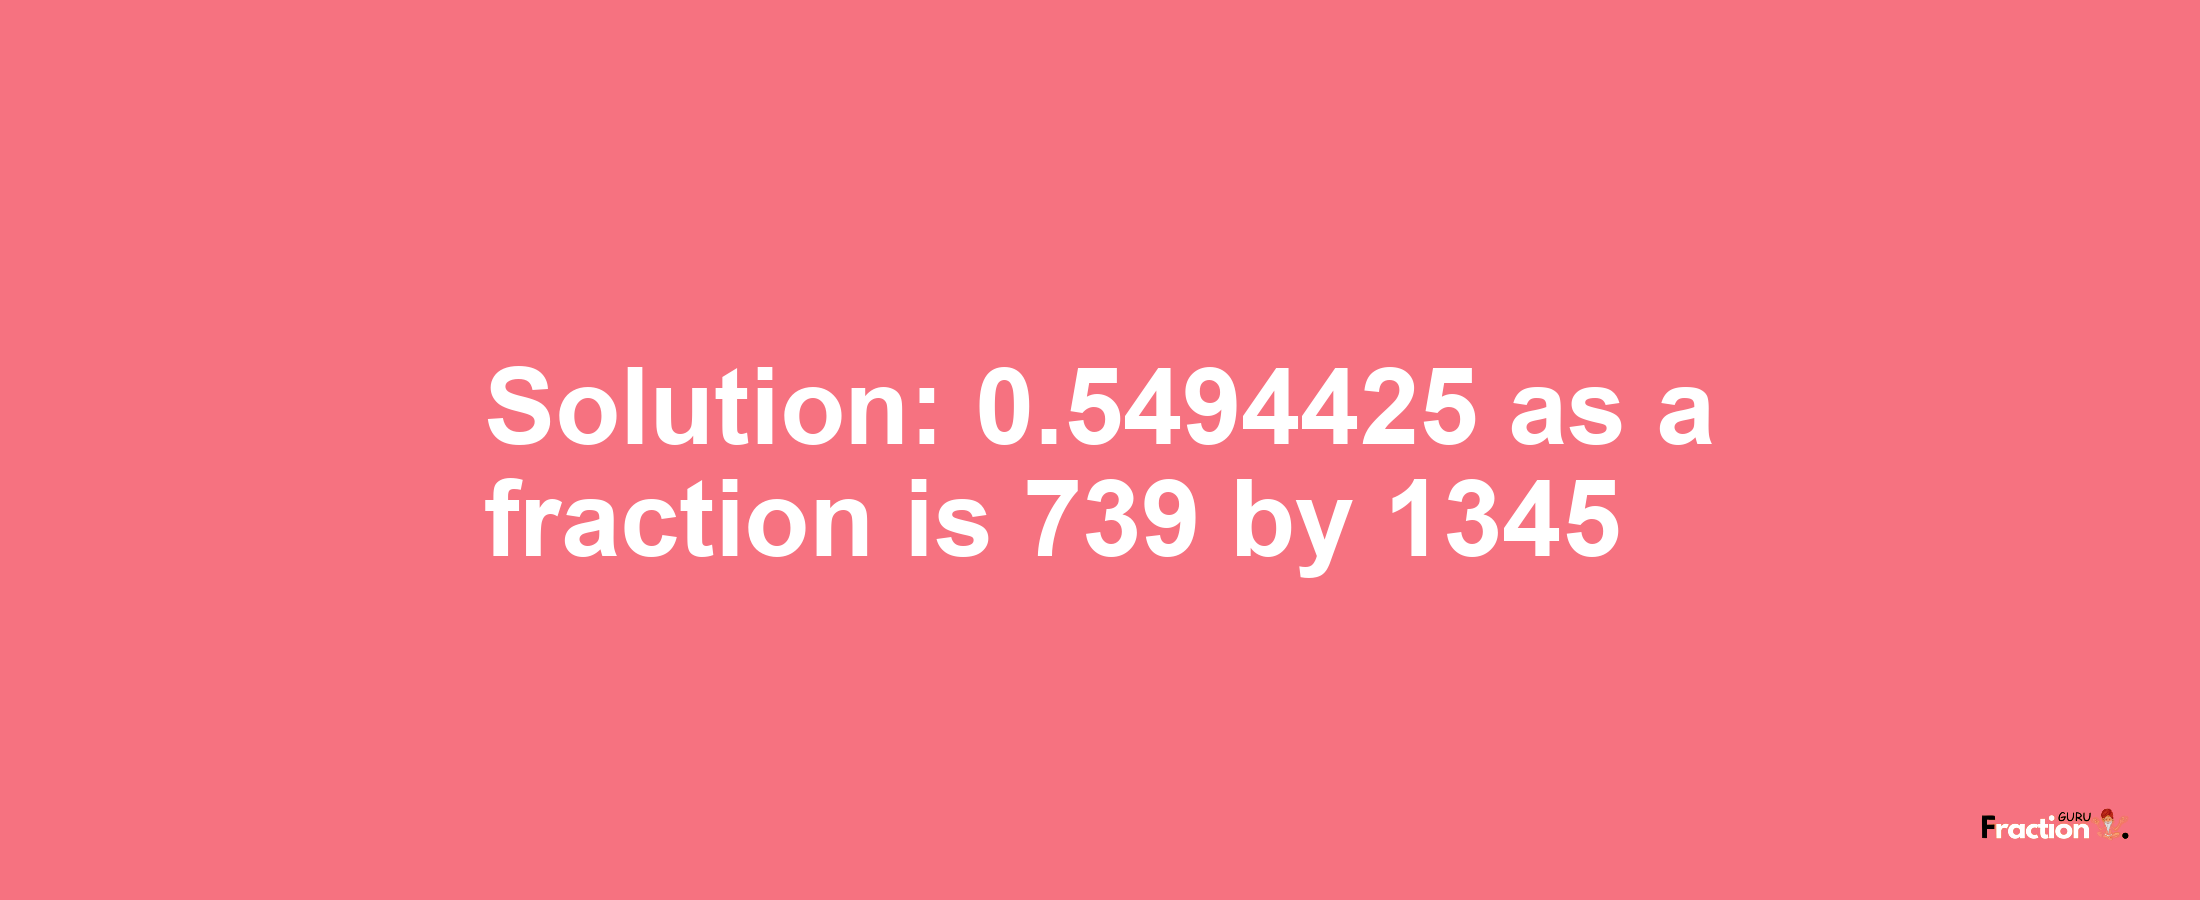 Solution:0.5494425 as a fraction is 739/1345